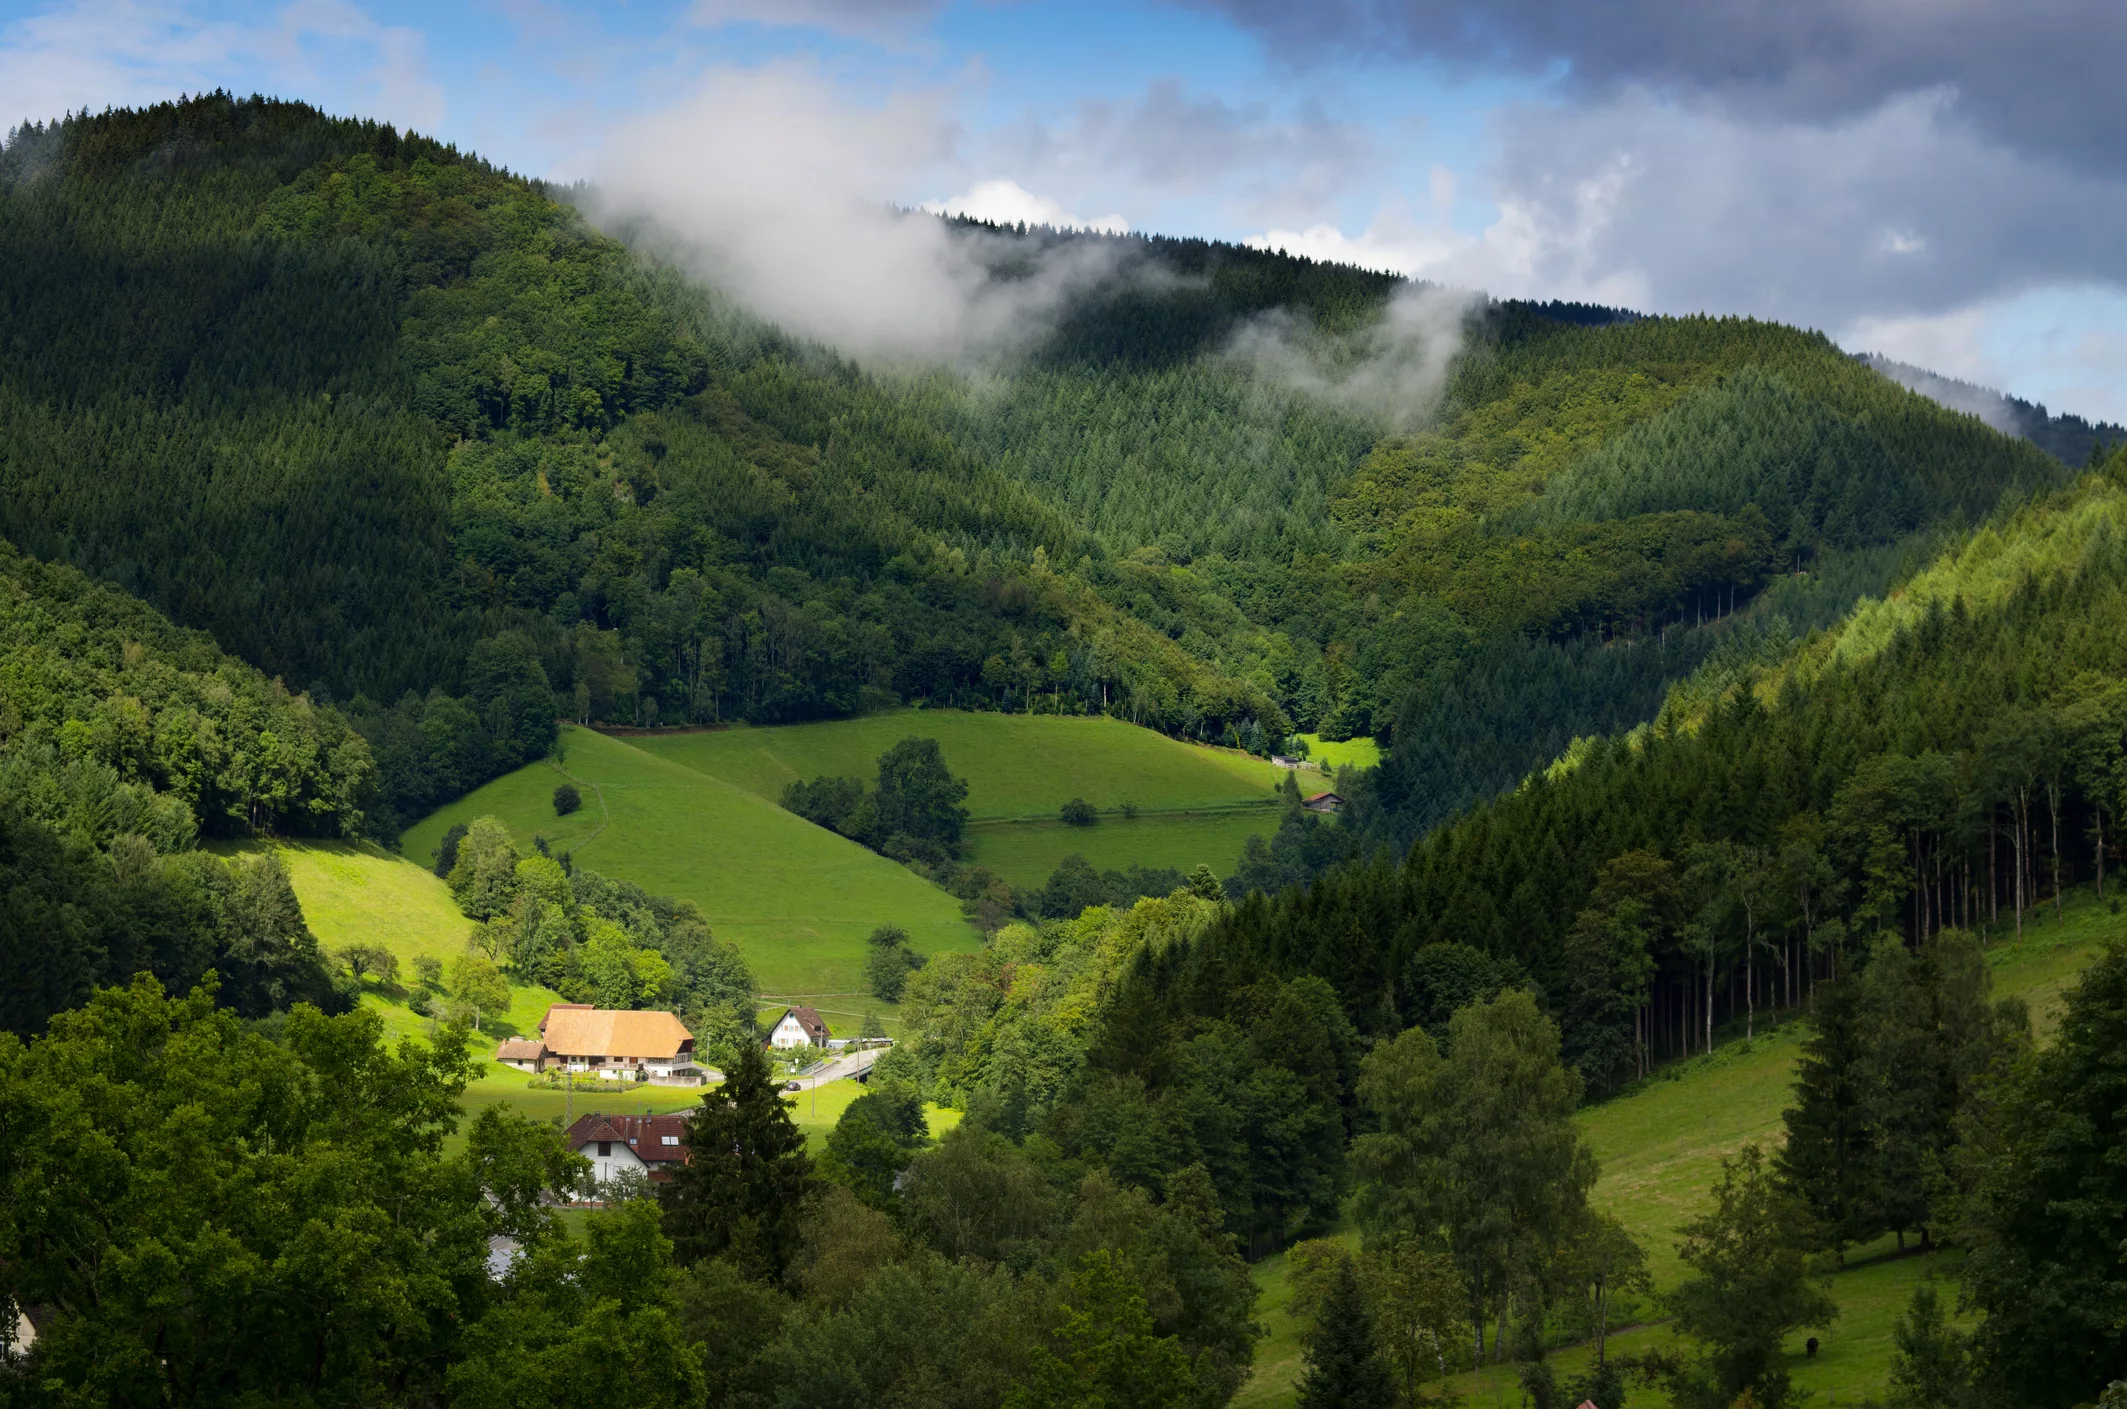 The Black Forest mountain range, covered with forests of green trees and grass, with a small village seen in the centre